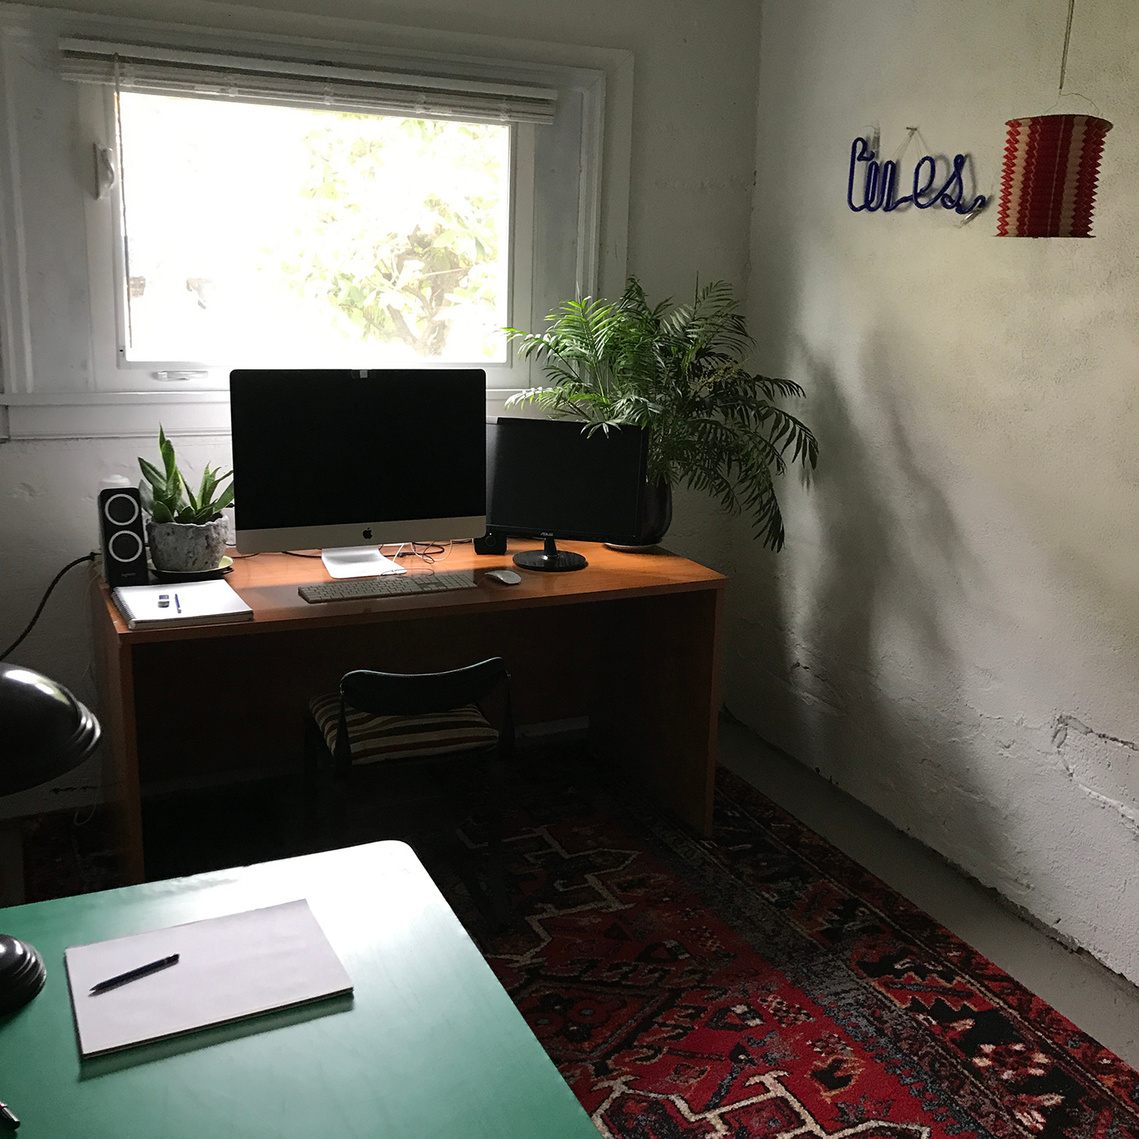 Studio of Kate Widdows, letterer and designer, including a desk, computer, and drawing table.